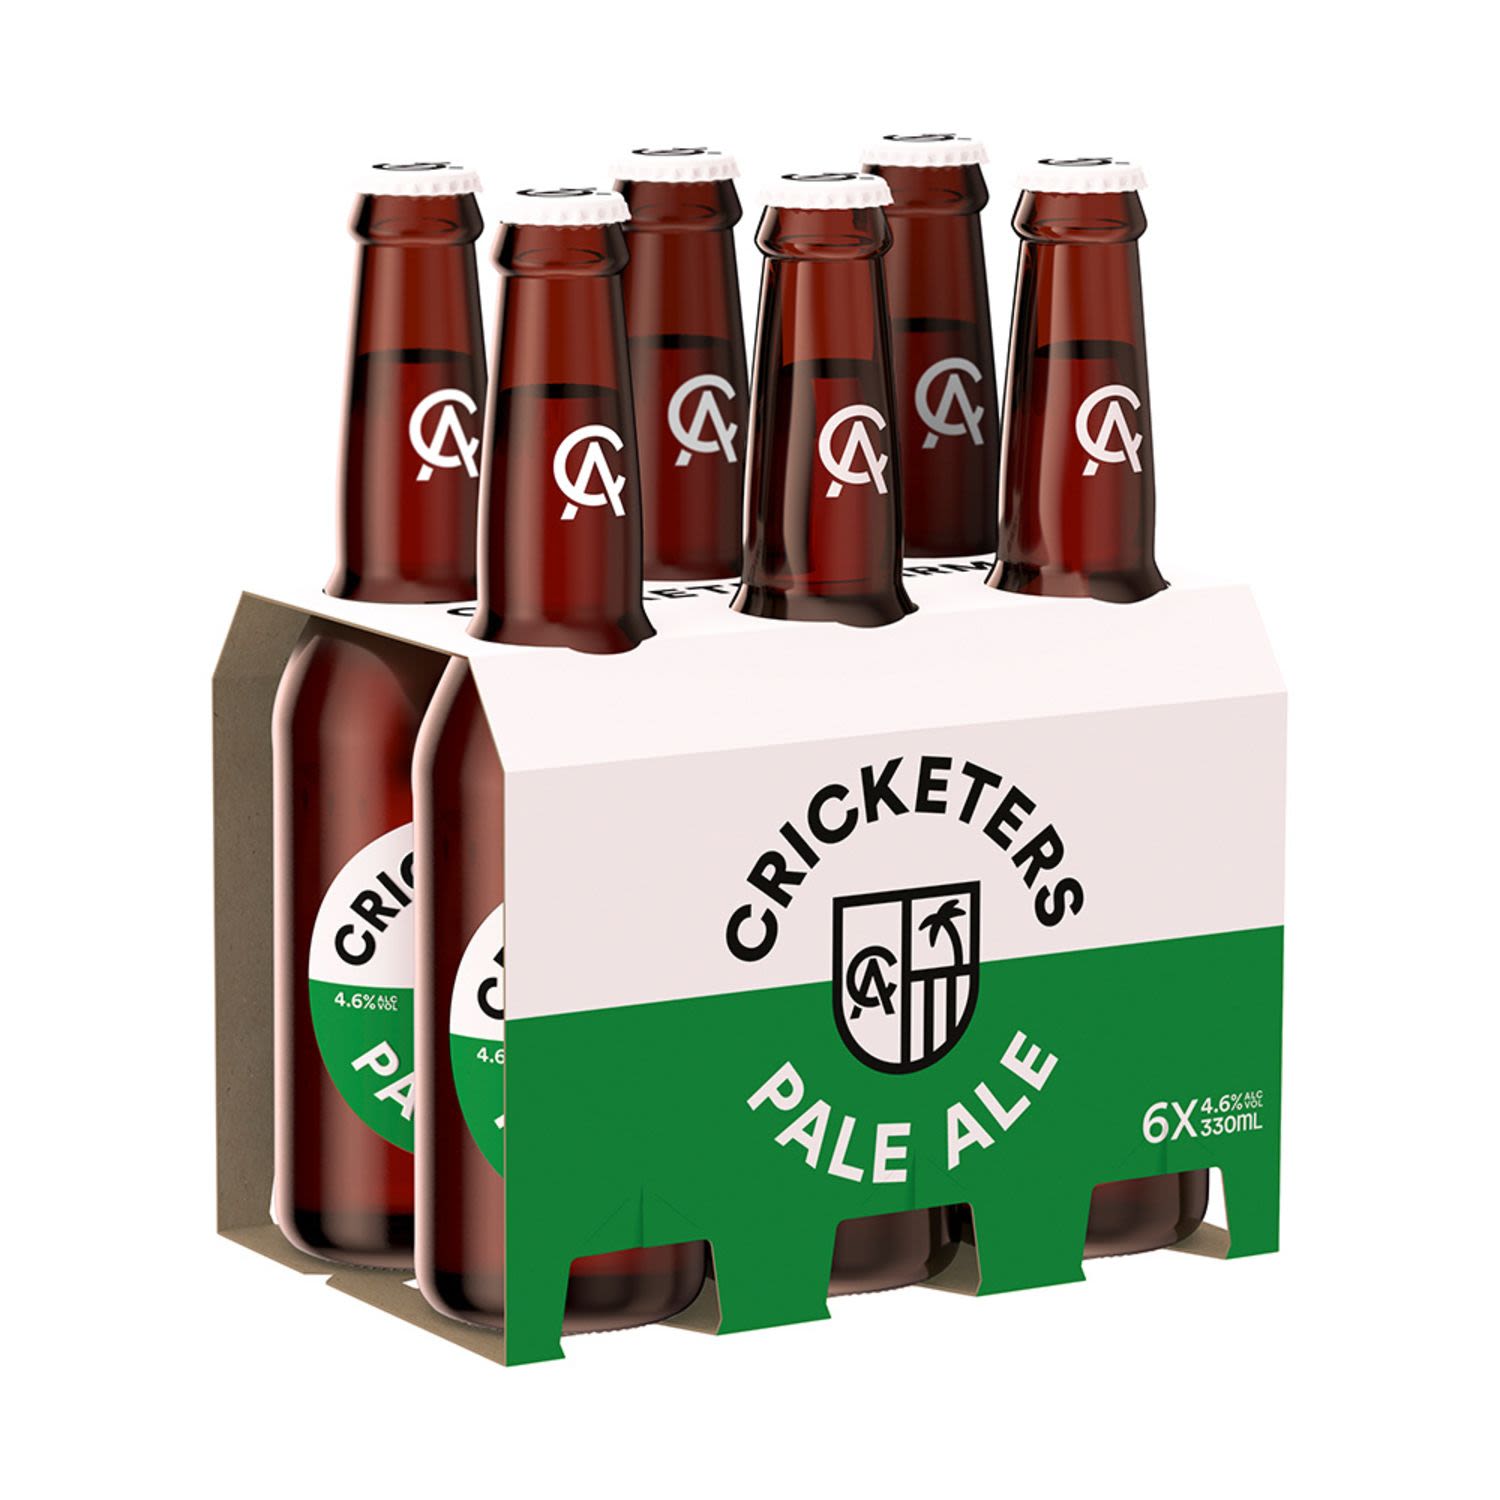 Cricketers Arms Pale Ale Bottle 330mL 6 Pack